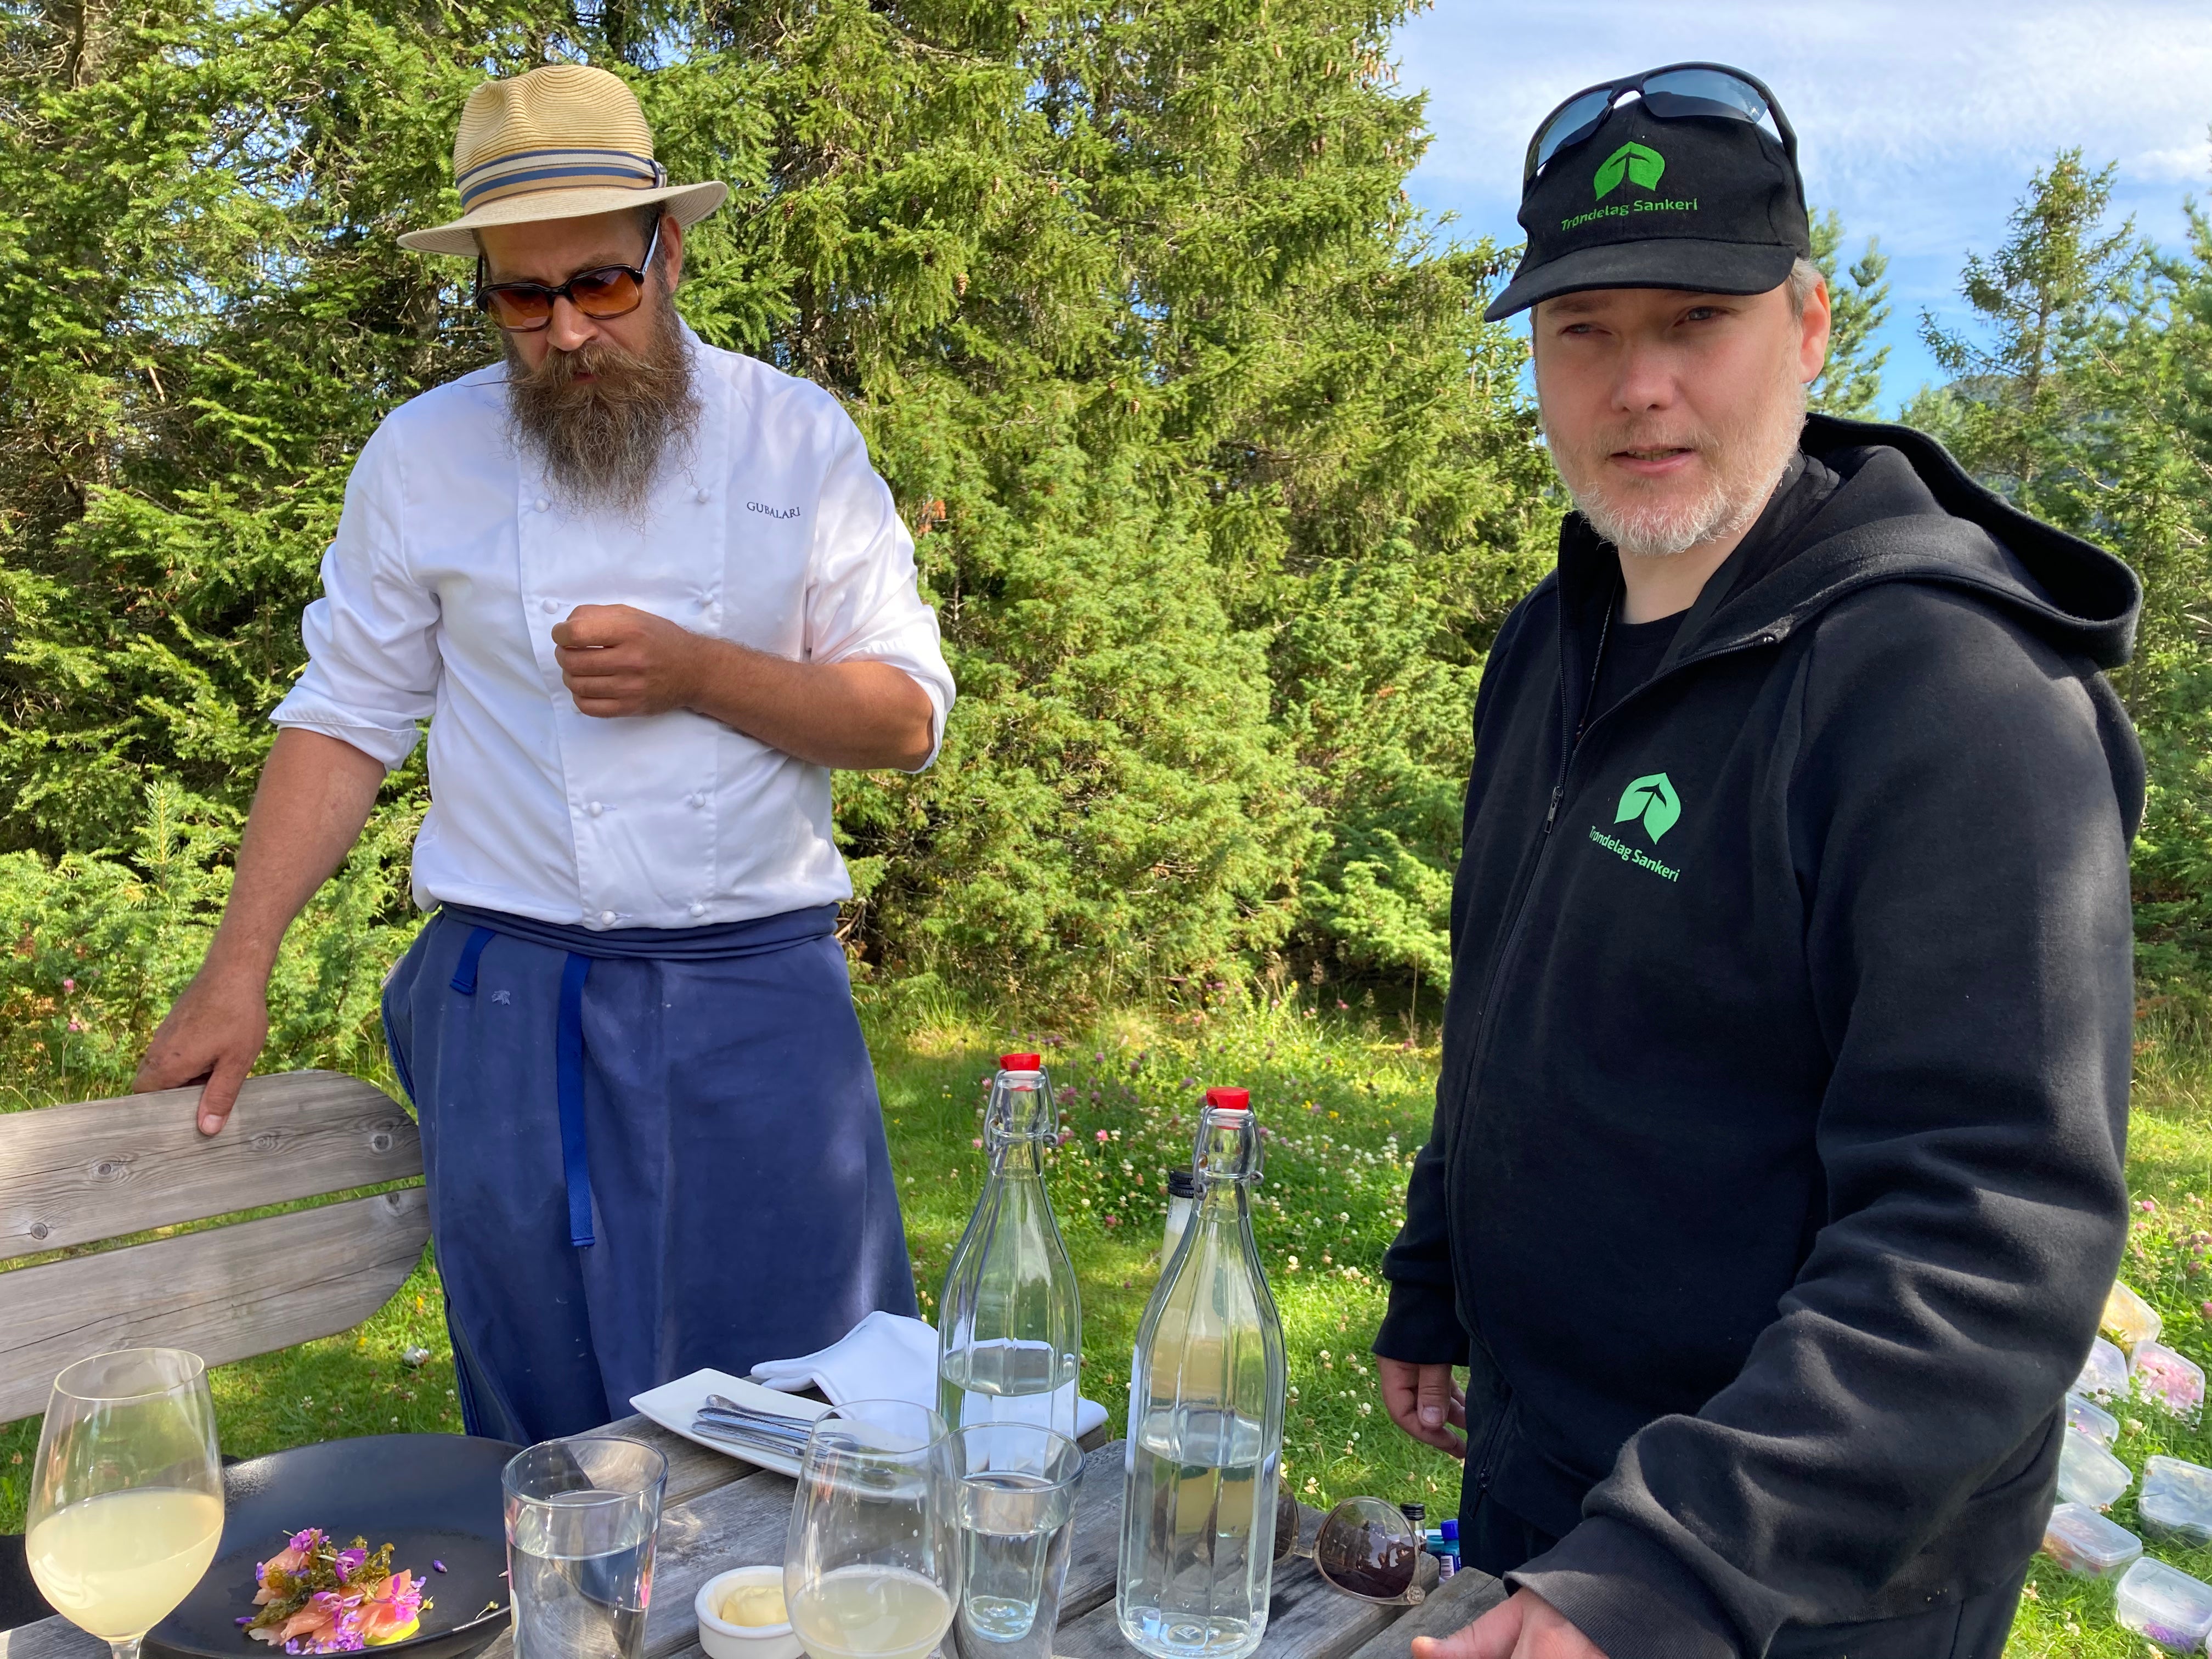 Jim-André Stene, right, has been a professional forager since 2019 and supplies ingredients for Trondheim-based chef and restaurateur Lars Laurentius Paulsen